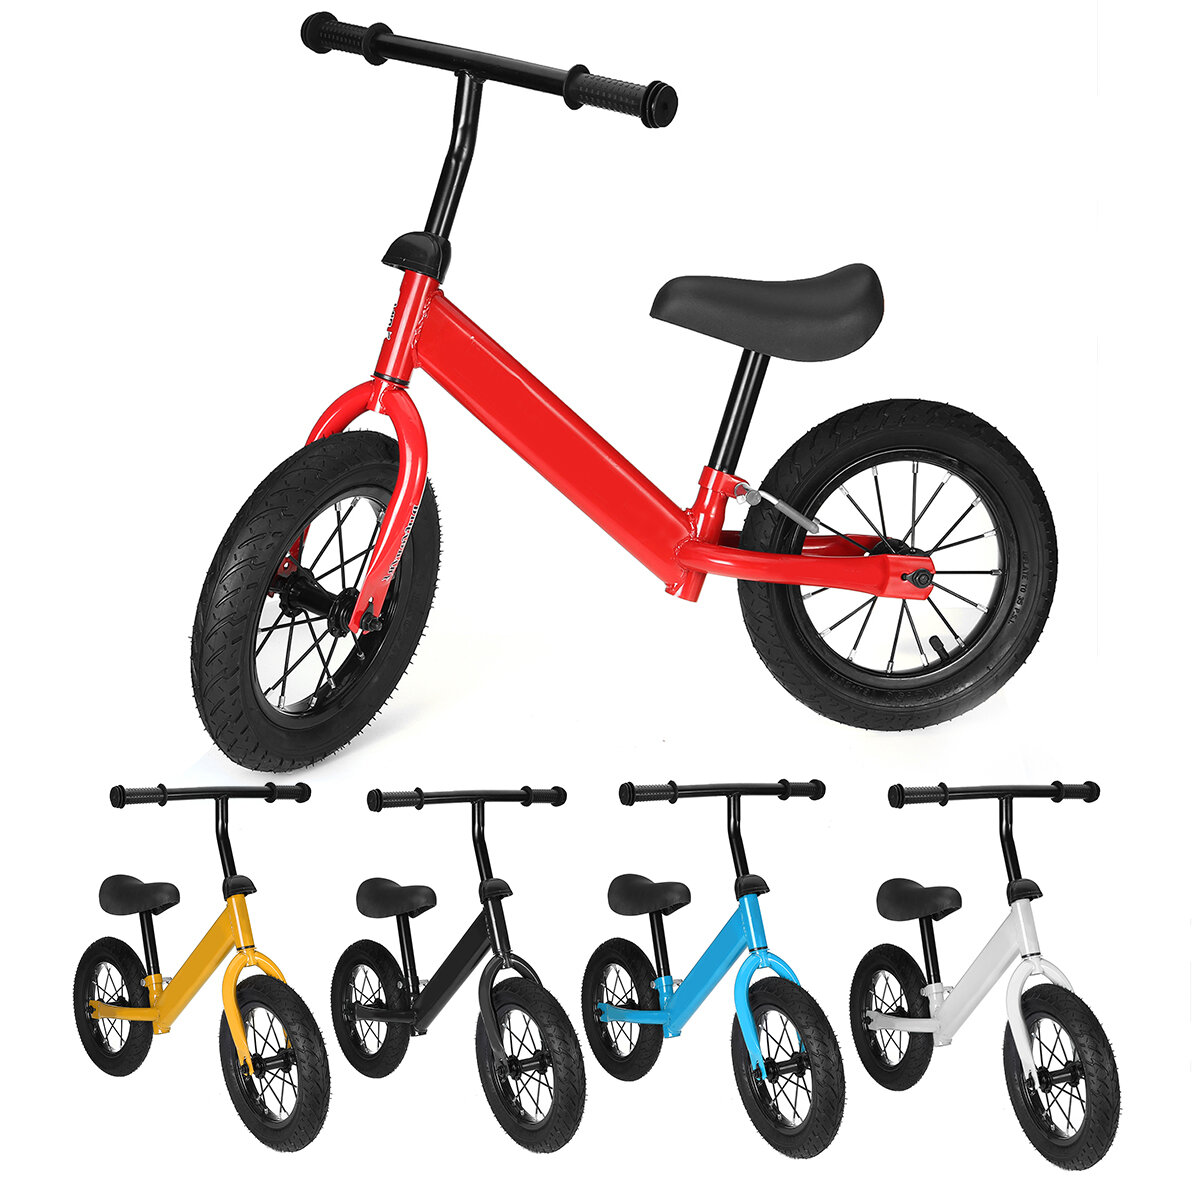 Children Balance Scooters Treadless Baby Bicycle Toy Child Bike With Tire Pump For 1-6 Year Olds